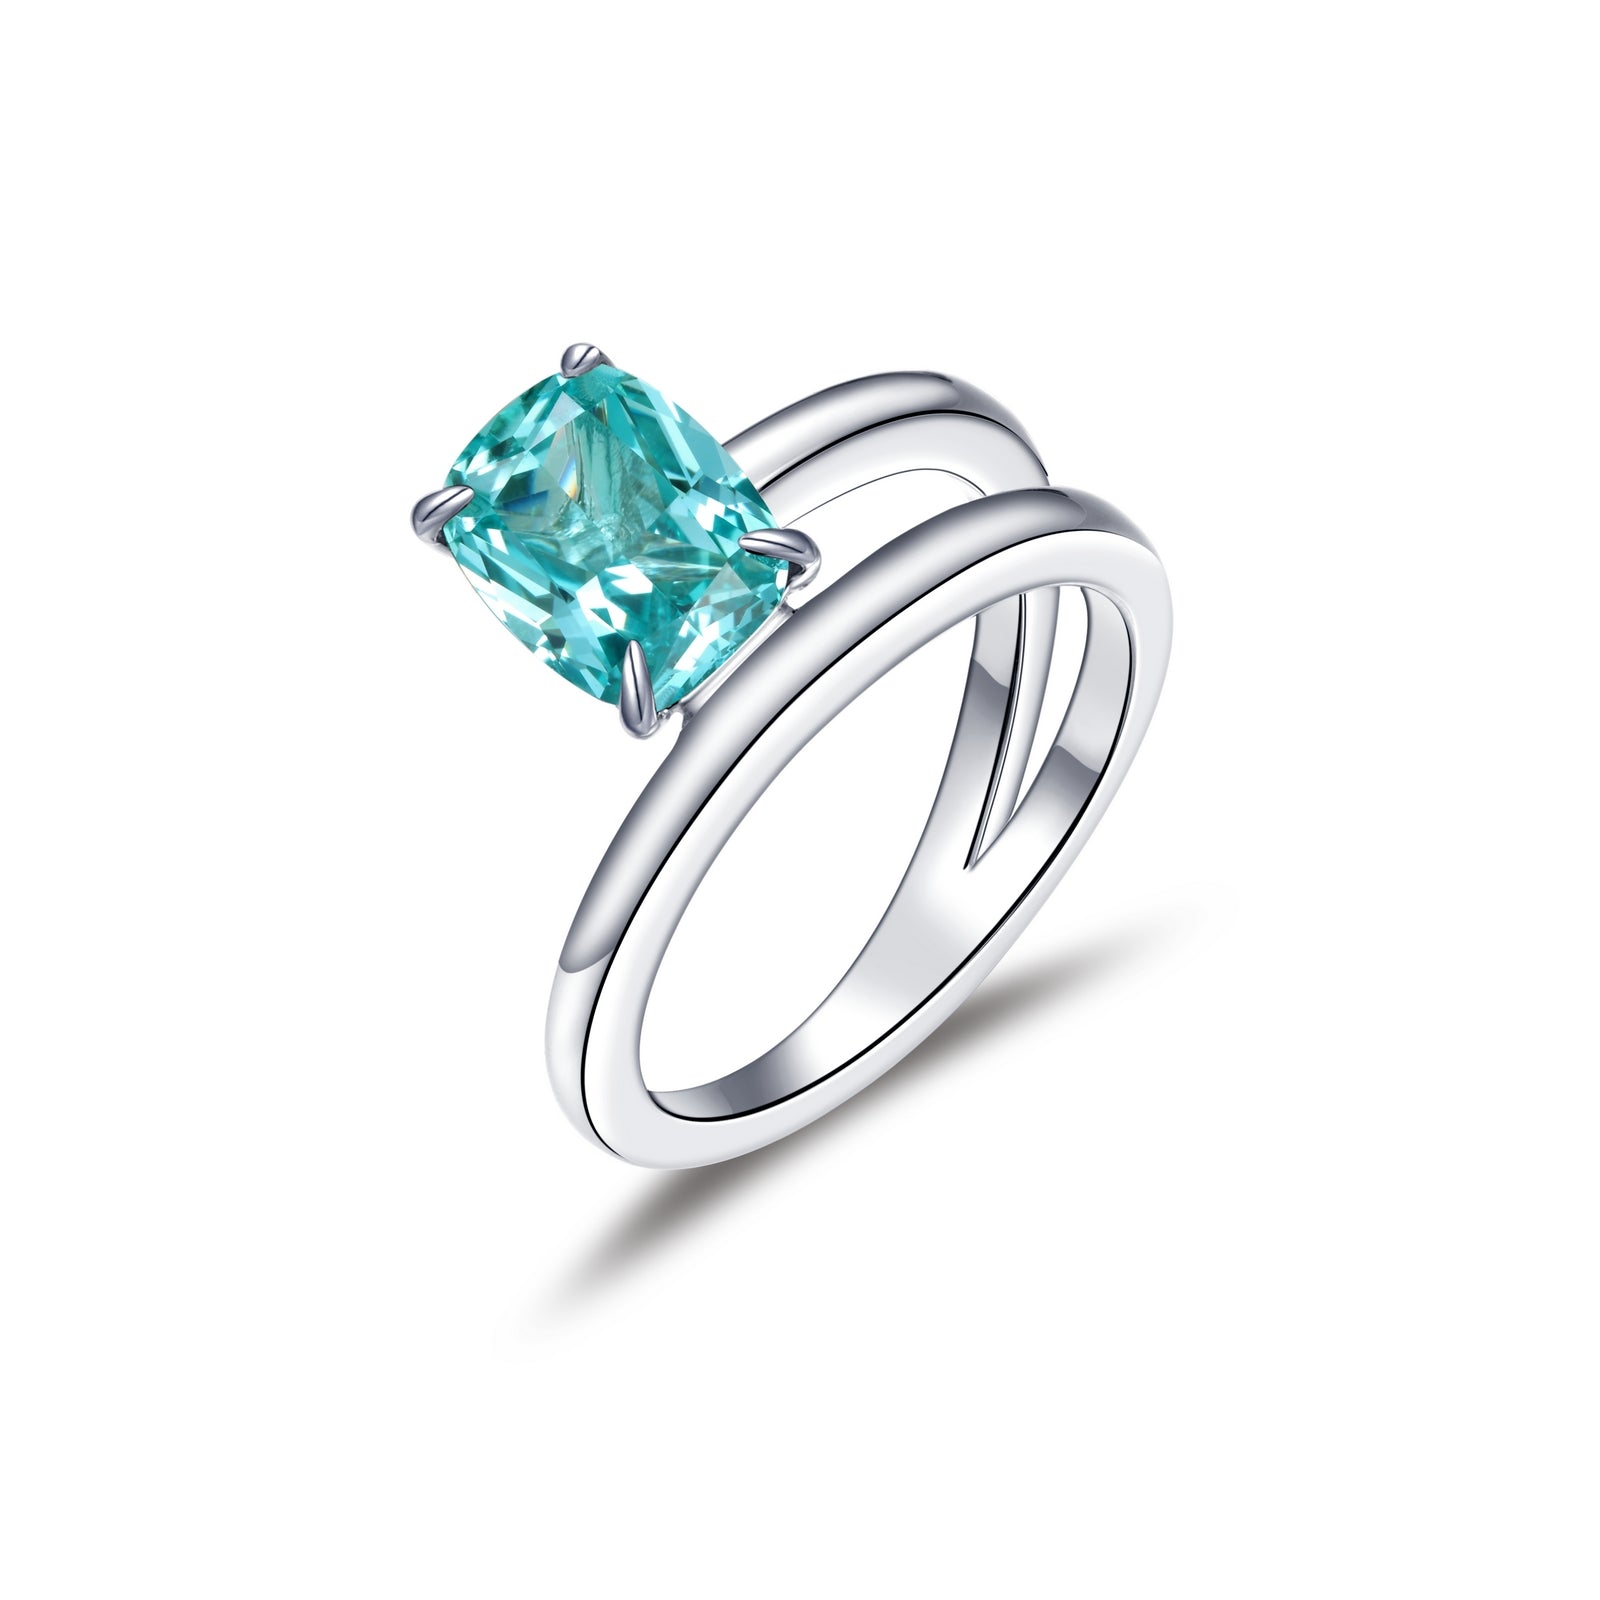 Fancy Lab-Grown Sapphire Solitaire Ring